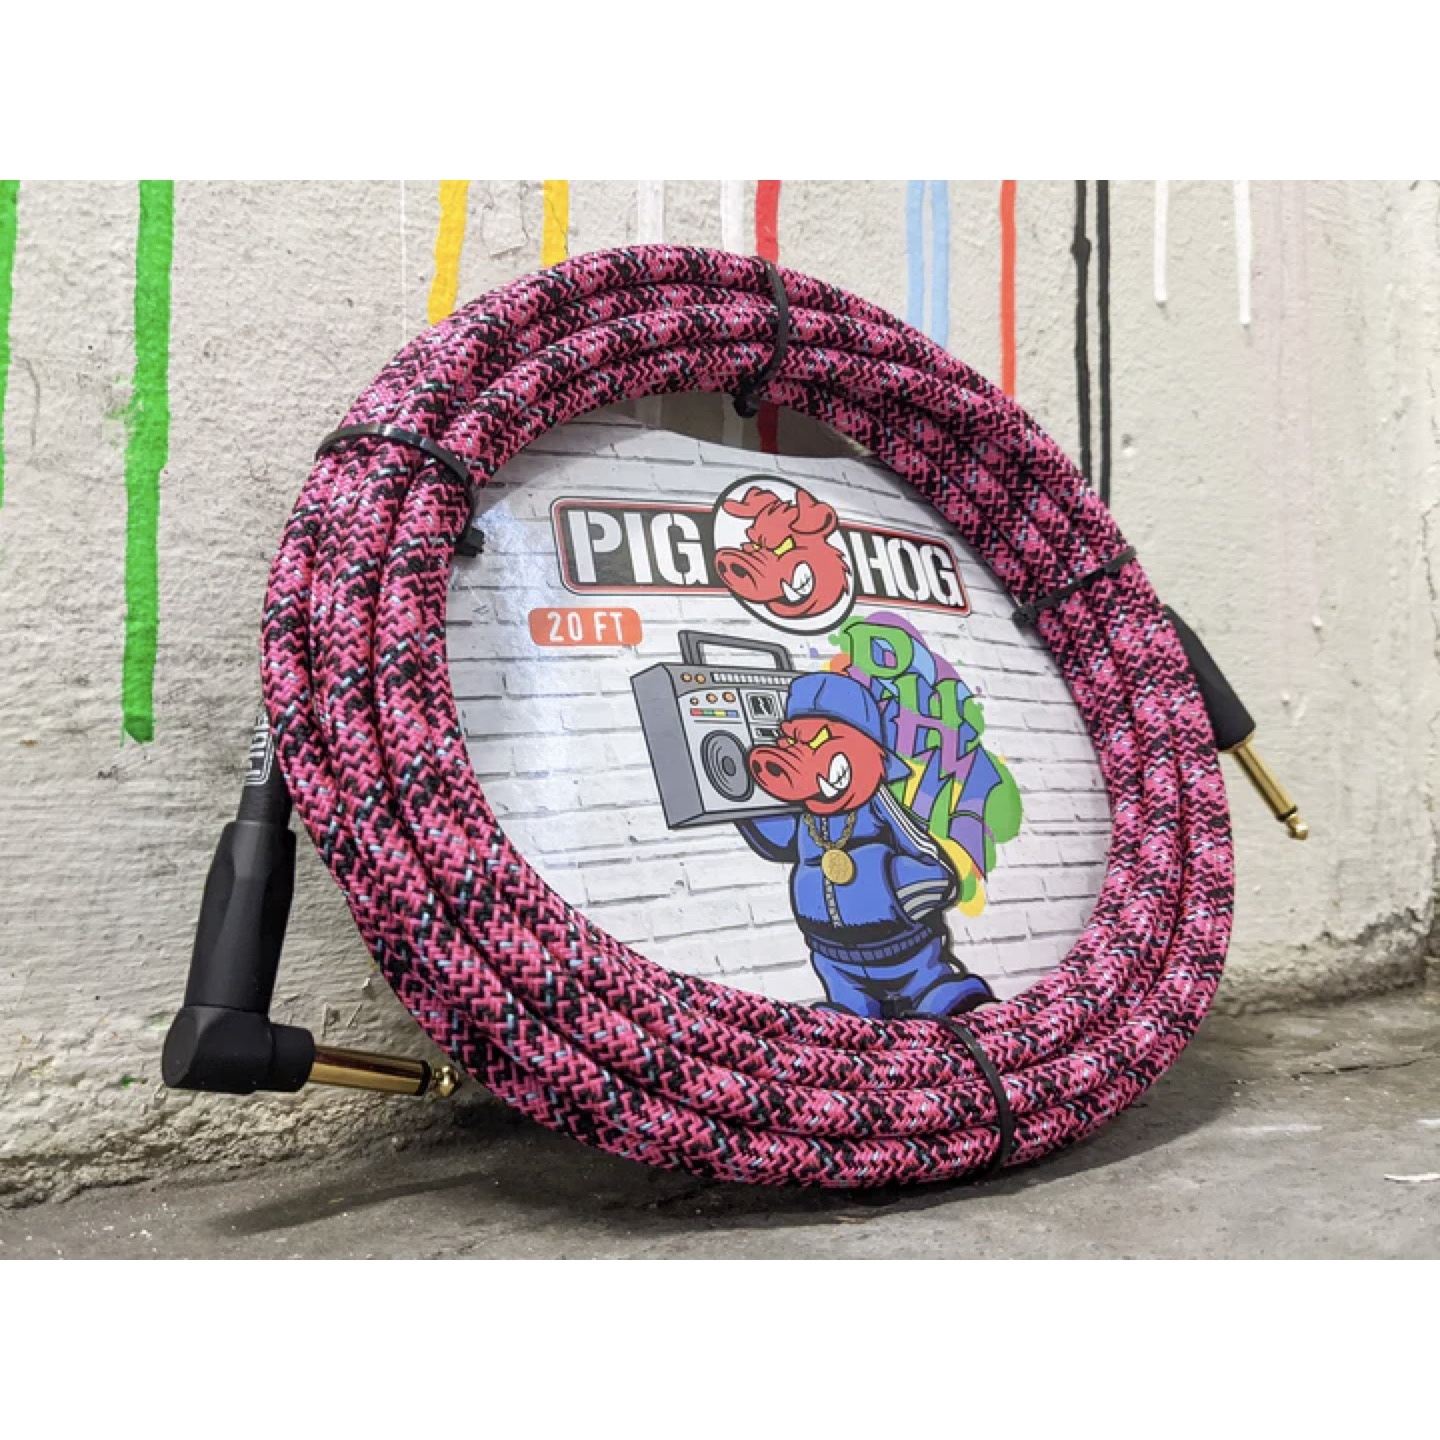 Pig Hog "Pink Graffiti" Woven Instrument Cable, 20 ft Right Angle